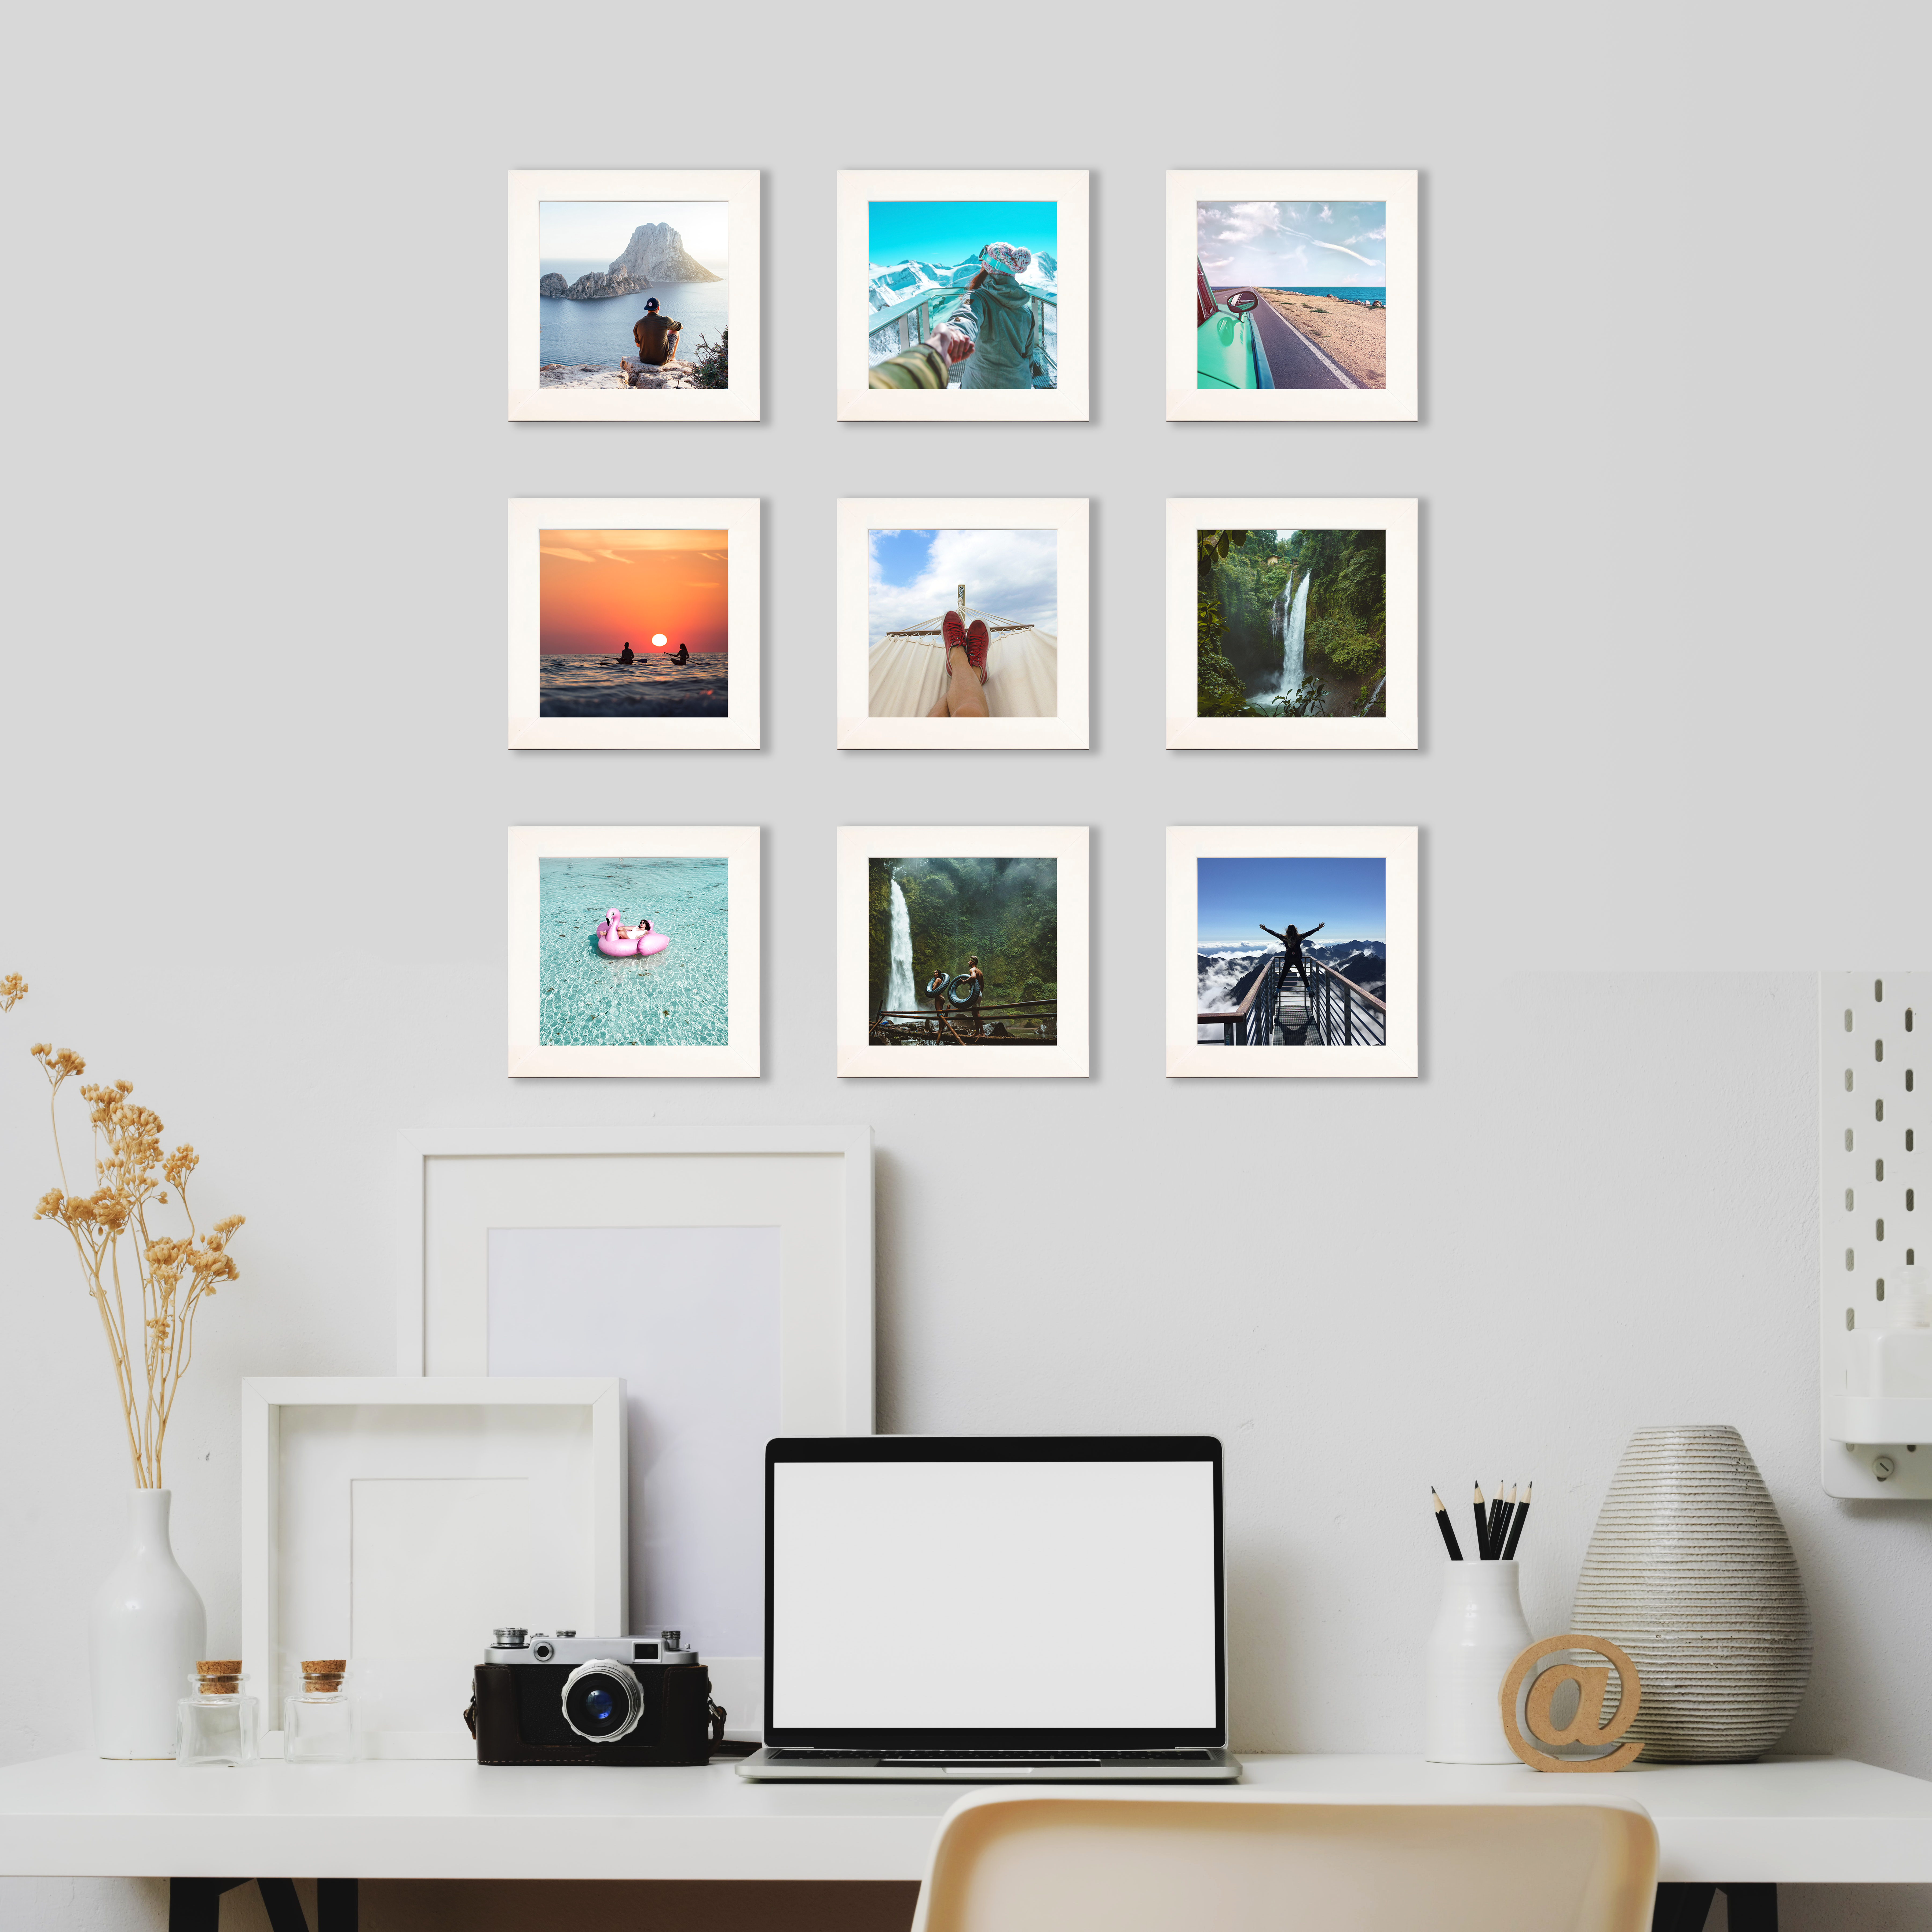 White Square Instagram Picture Frames For A Gallery